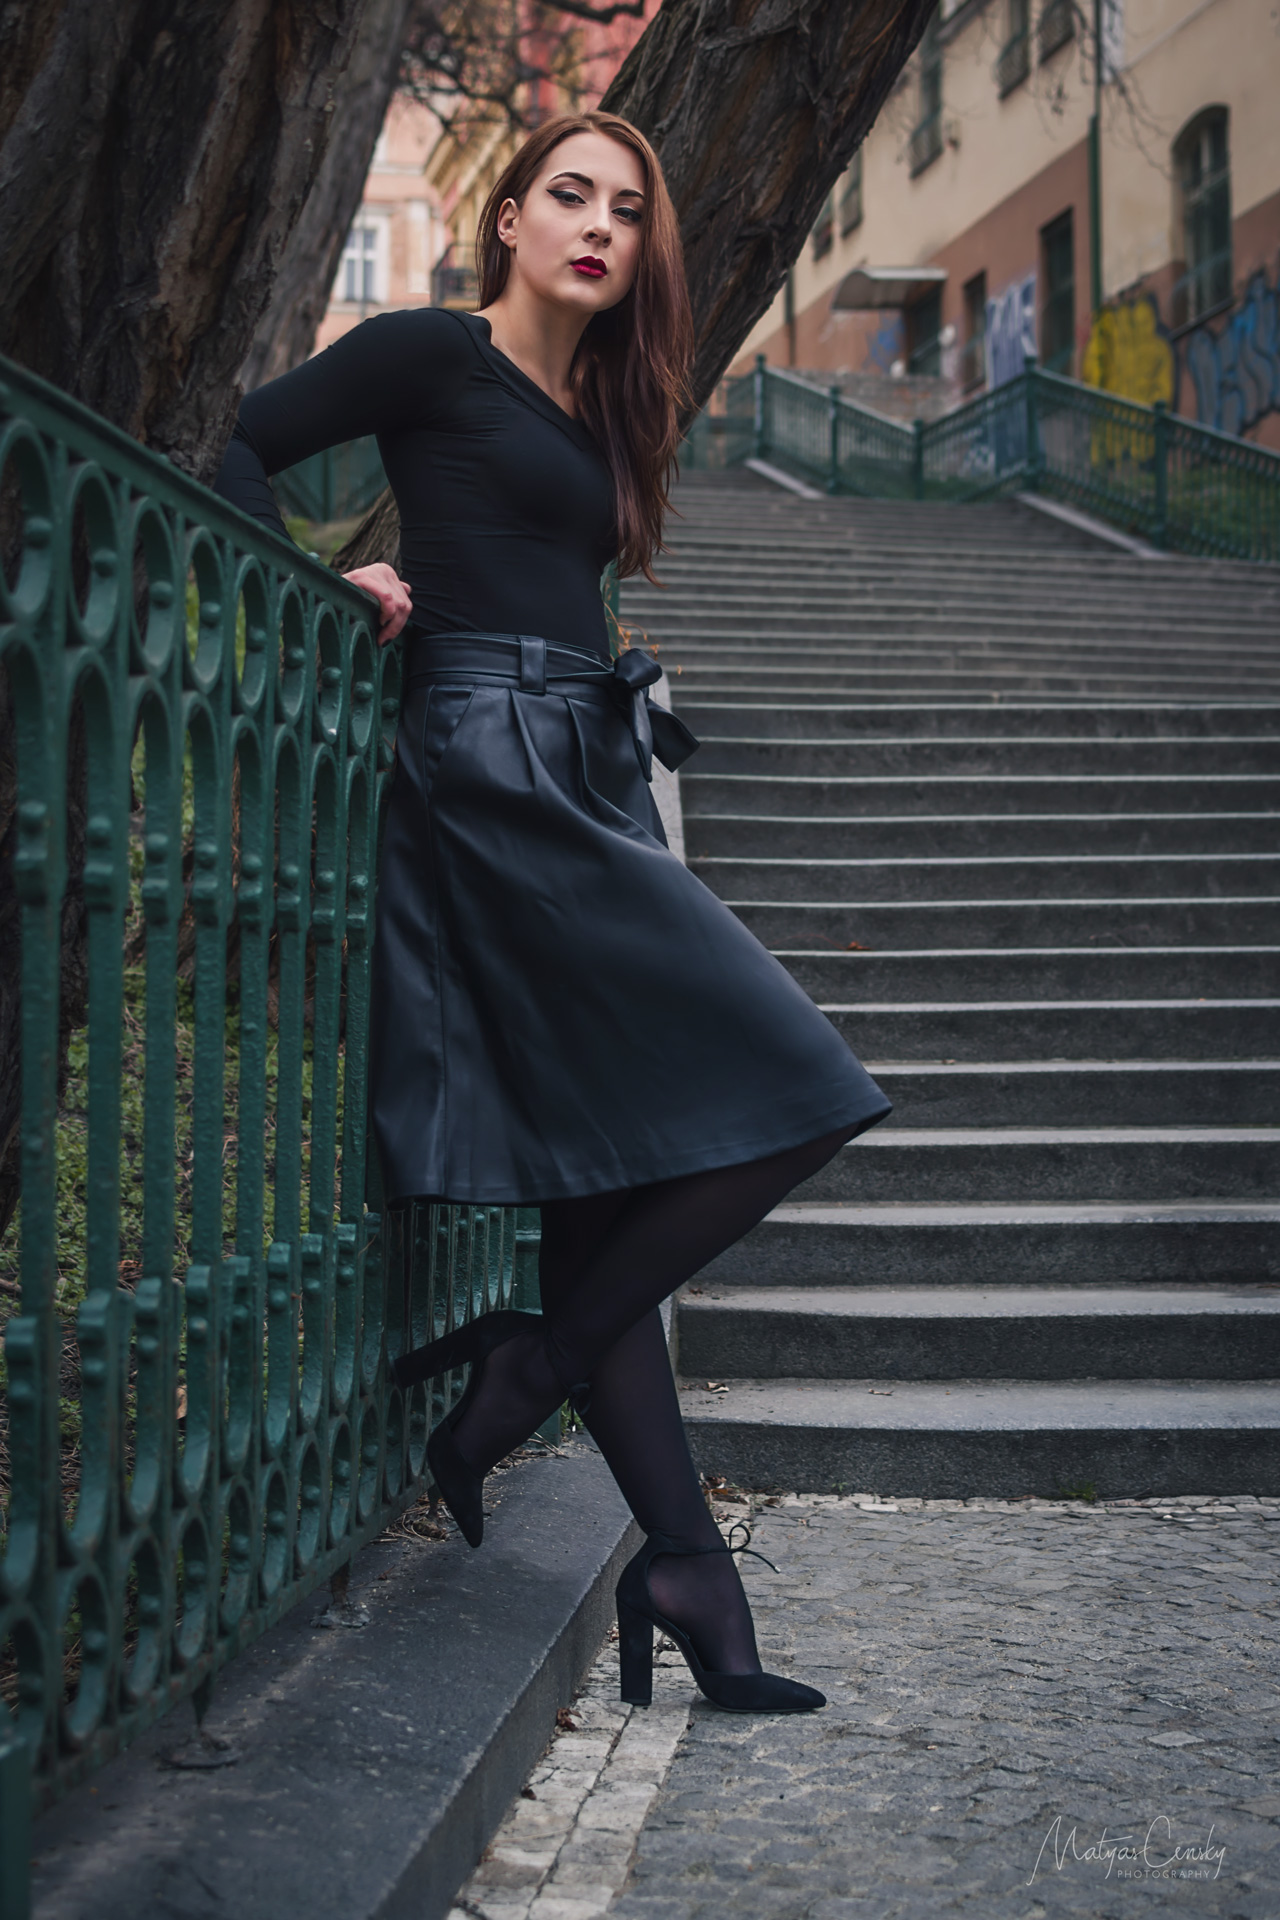 Full body shot of red hair model in black leather skirt, high heels, black top leaning against green decorative fence on stairs.